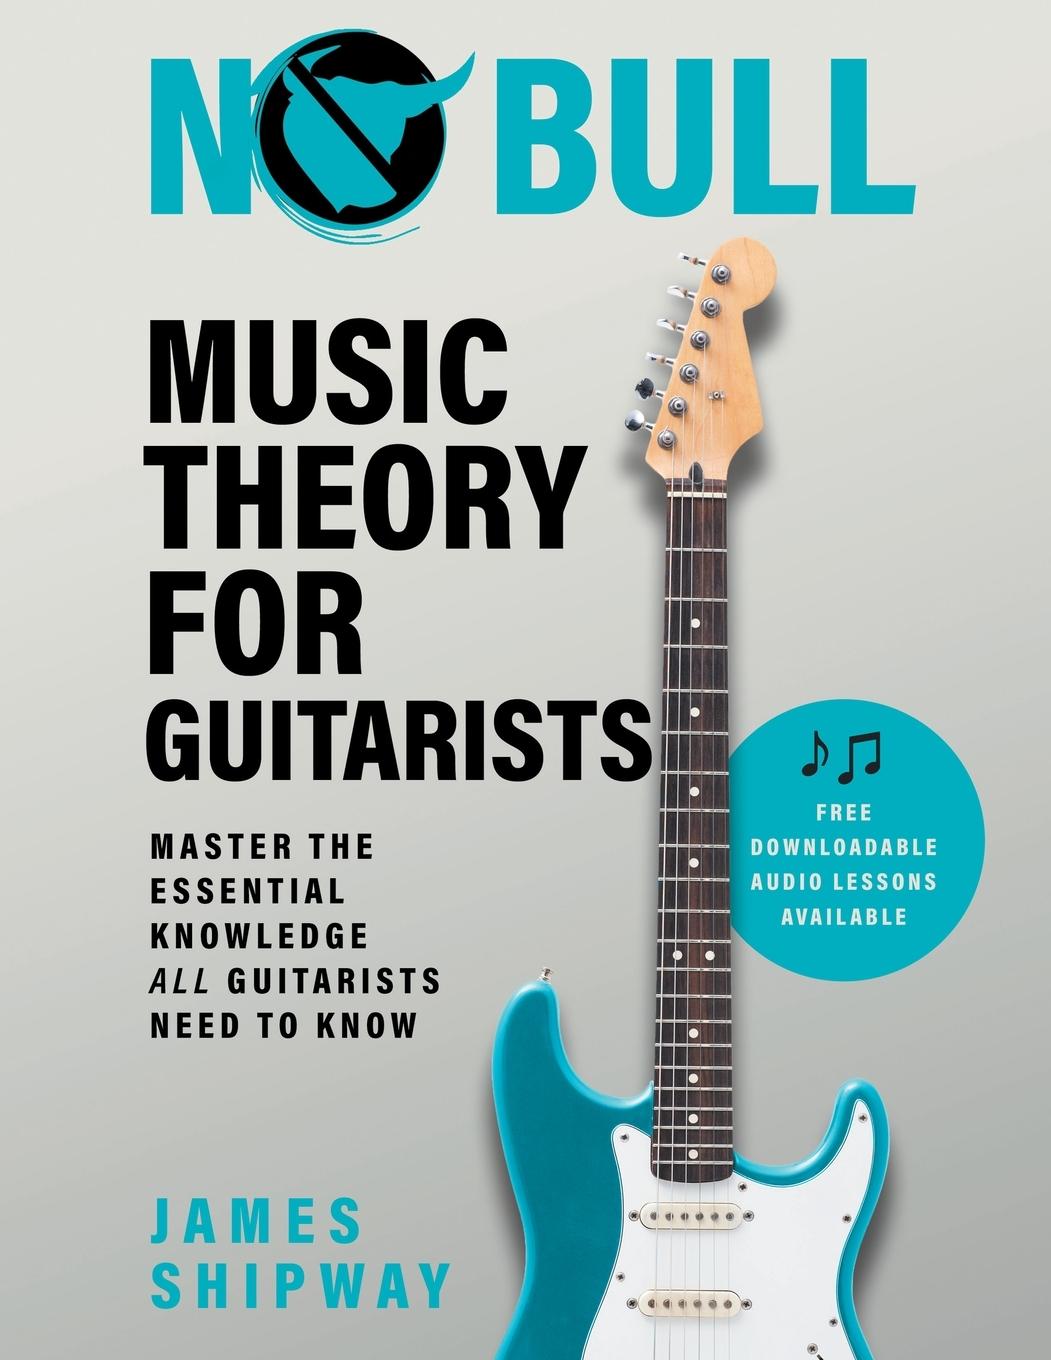 Book No Bull Music Theory for Guitarists James Shipway